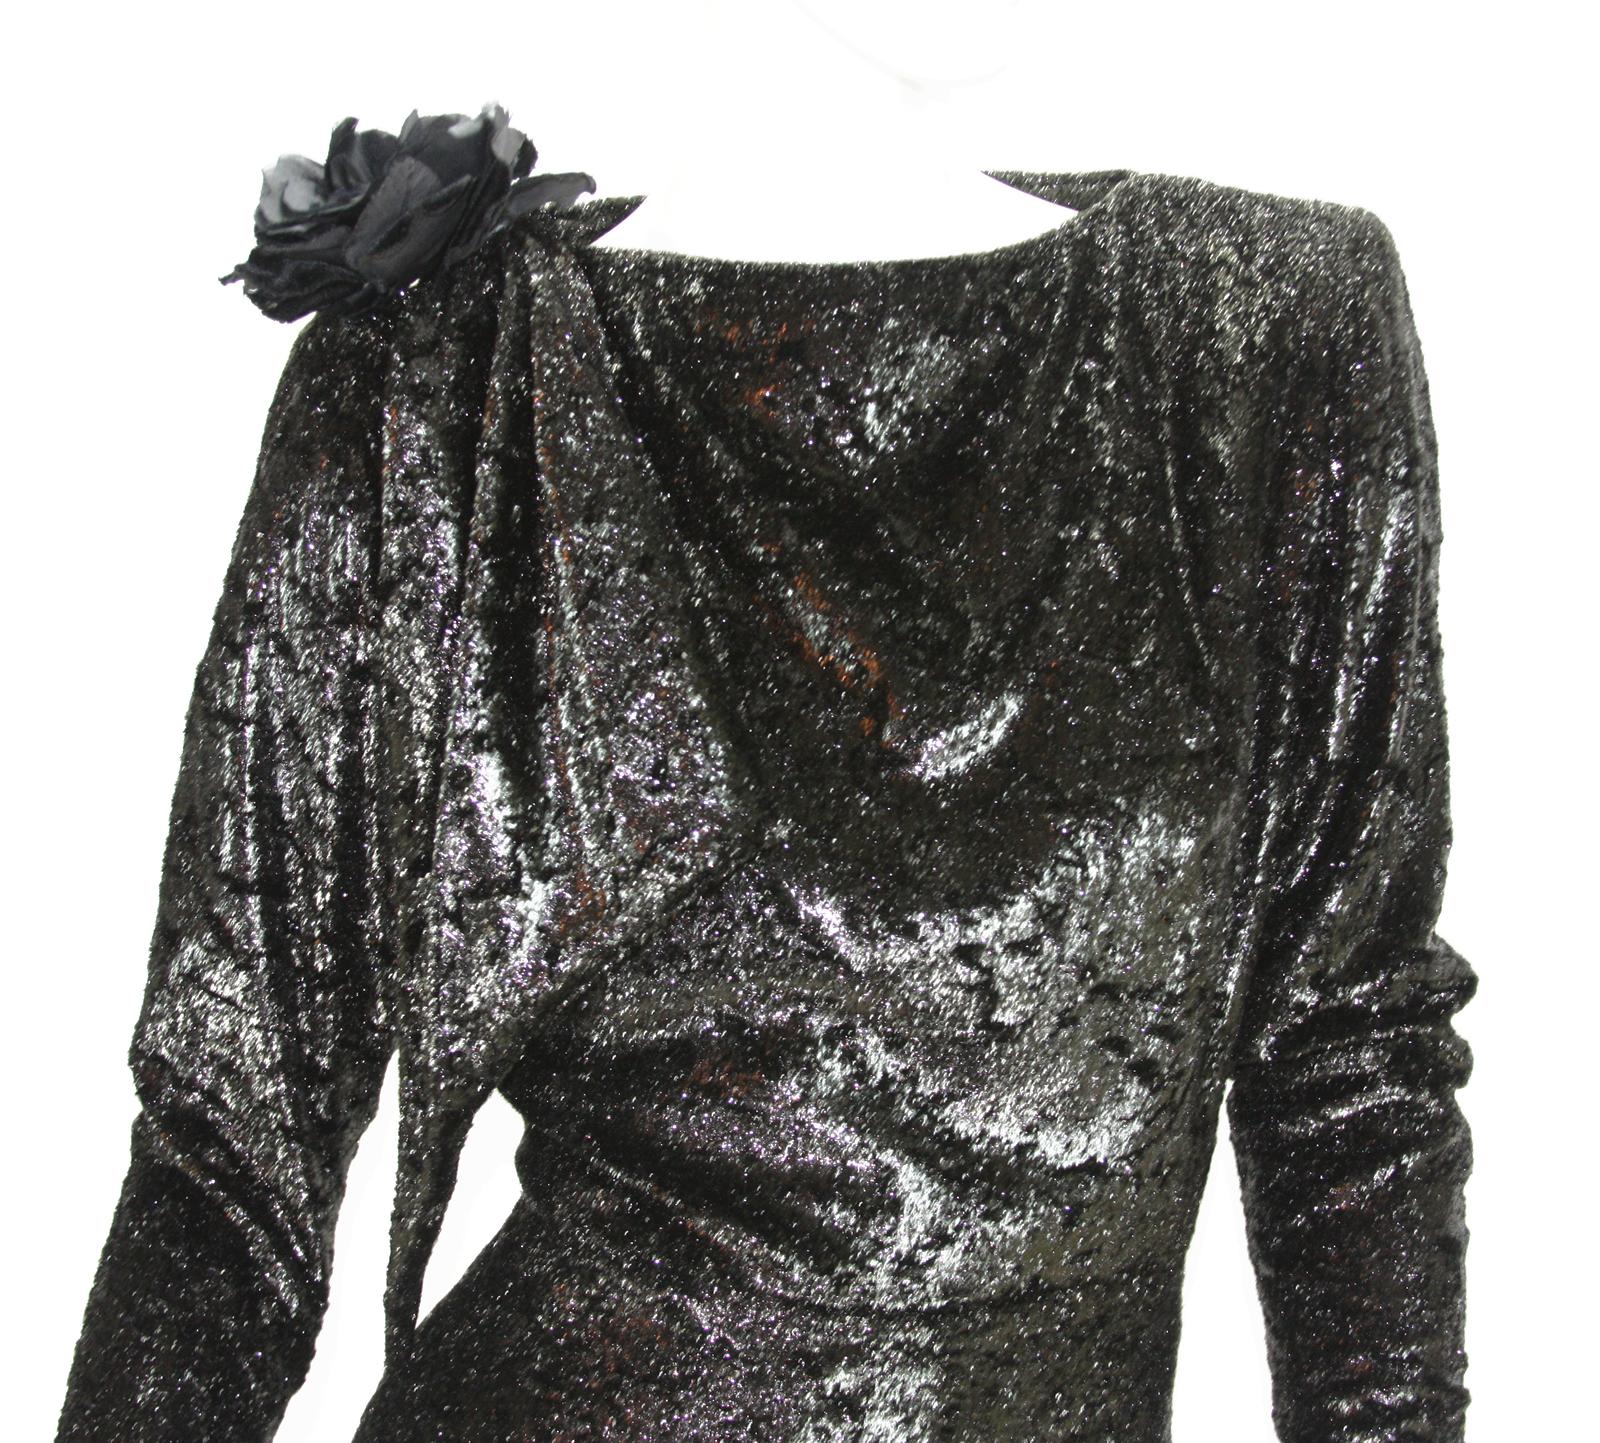 Rare 2 in 1 Yves Saint Laurent Couture Crushed Velvet Numbered Dress c. 1986 For Sale 4